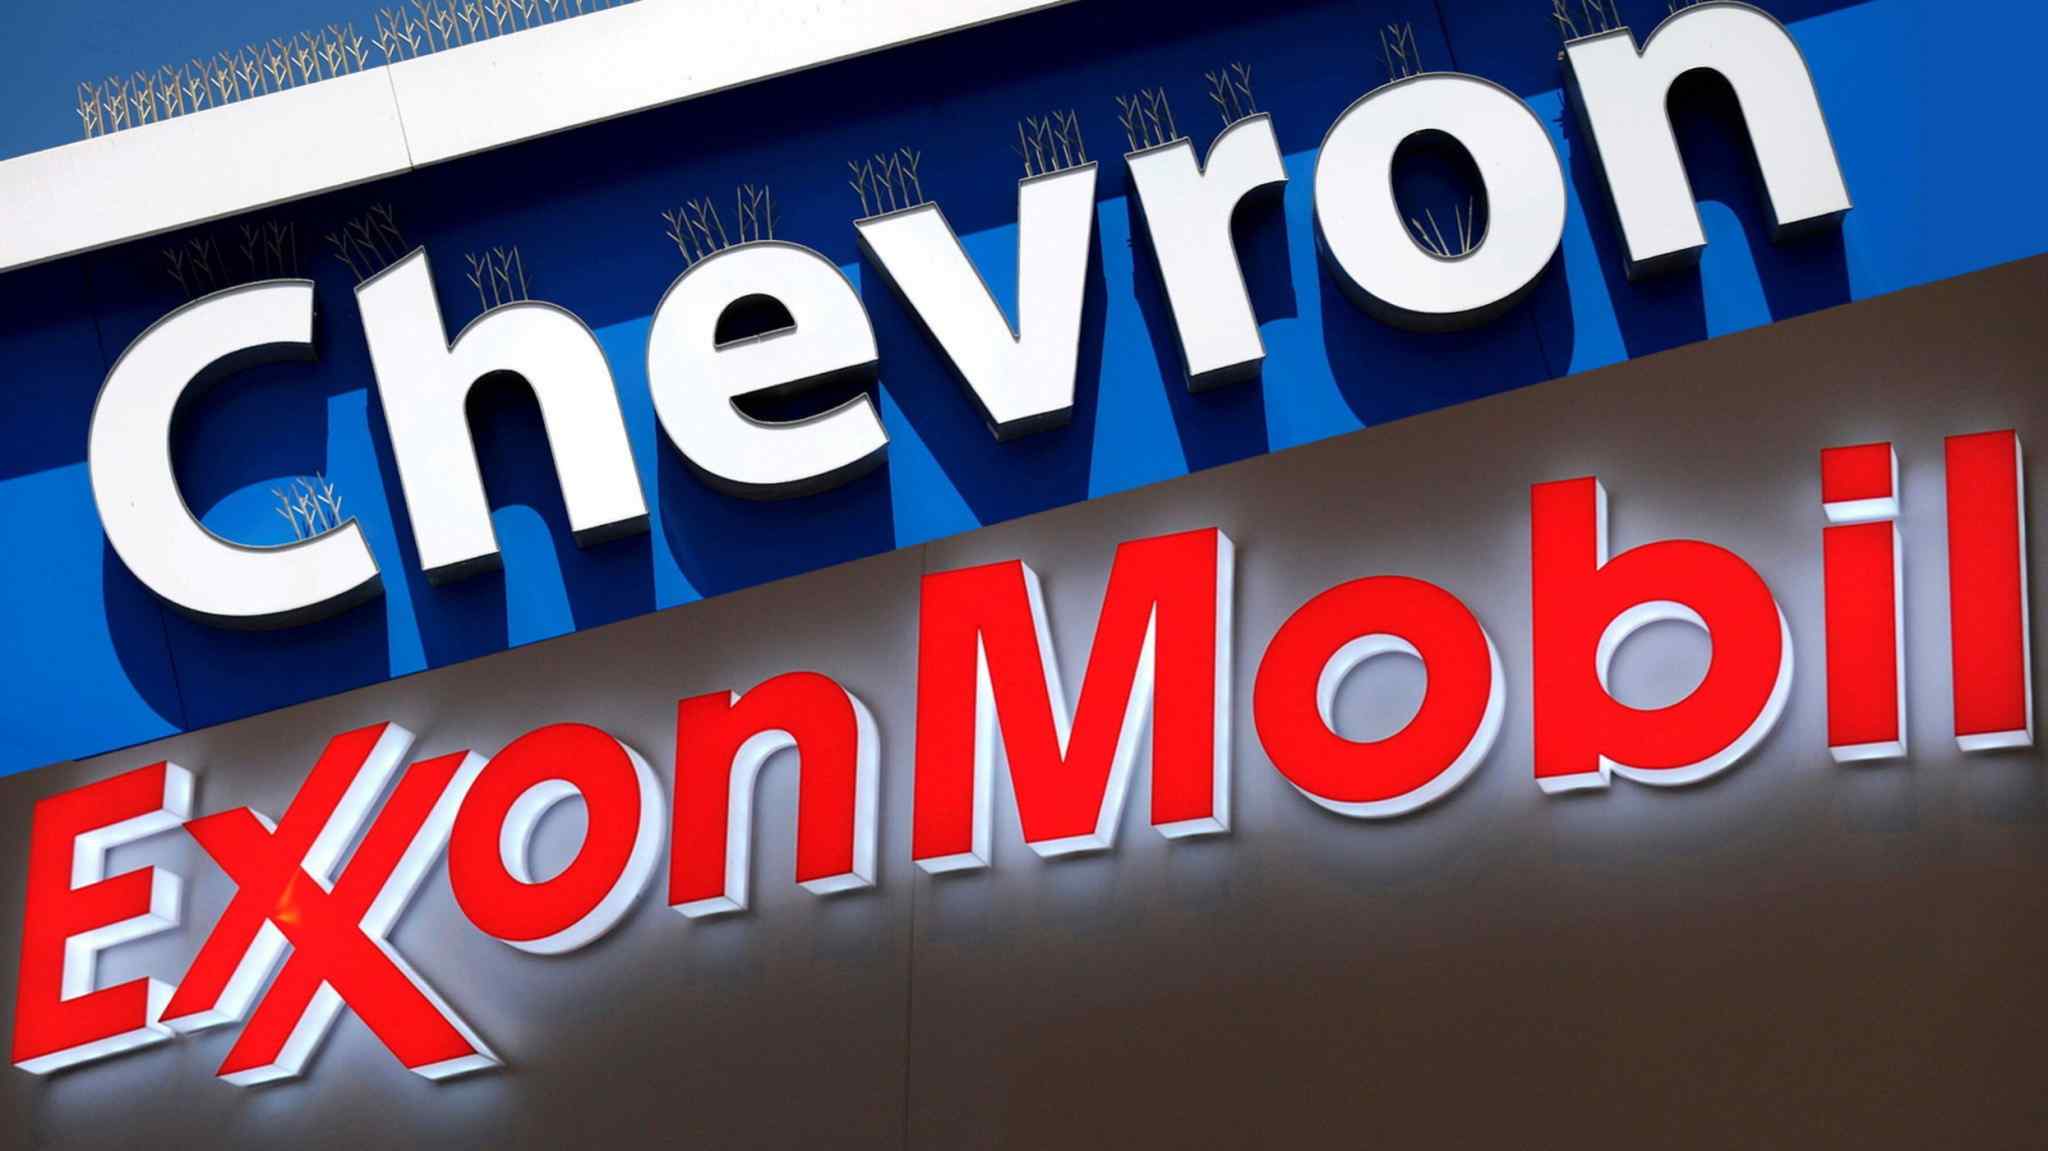 Exxon and Chevron shareholders cut support for climate resolutions